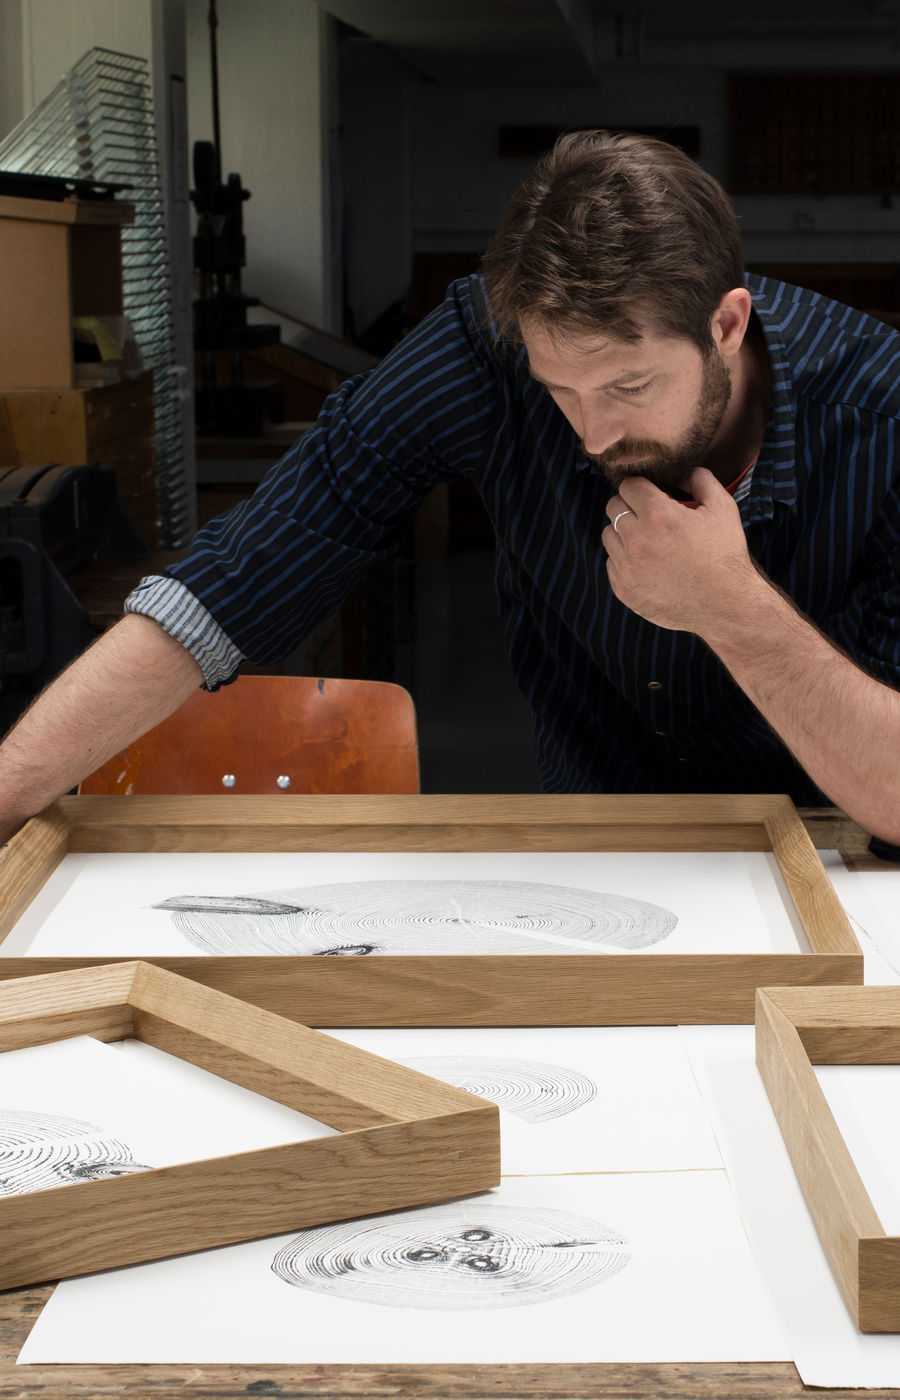 Josh Krute, artist behind The Trees of Pikku-Finlandia, pictured in his studio with the wood prints and wooden frames.